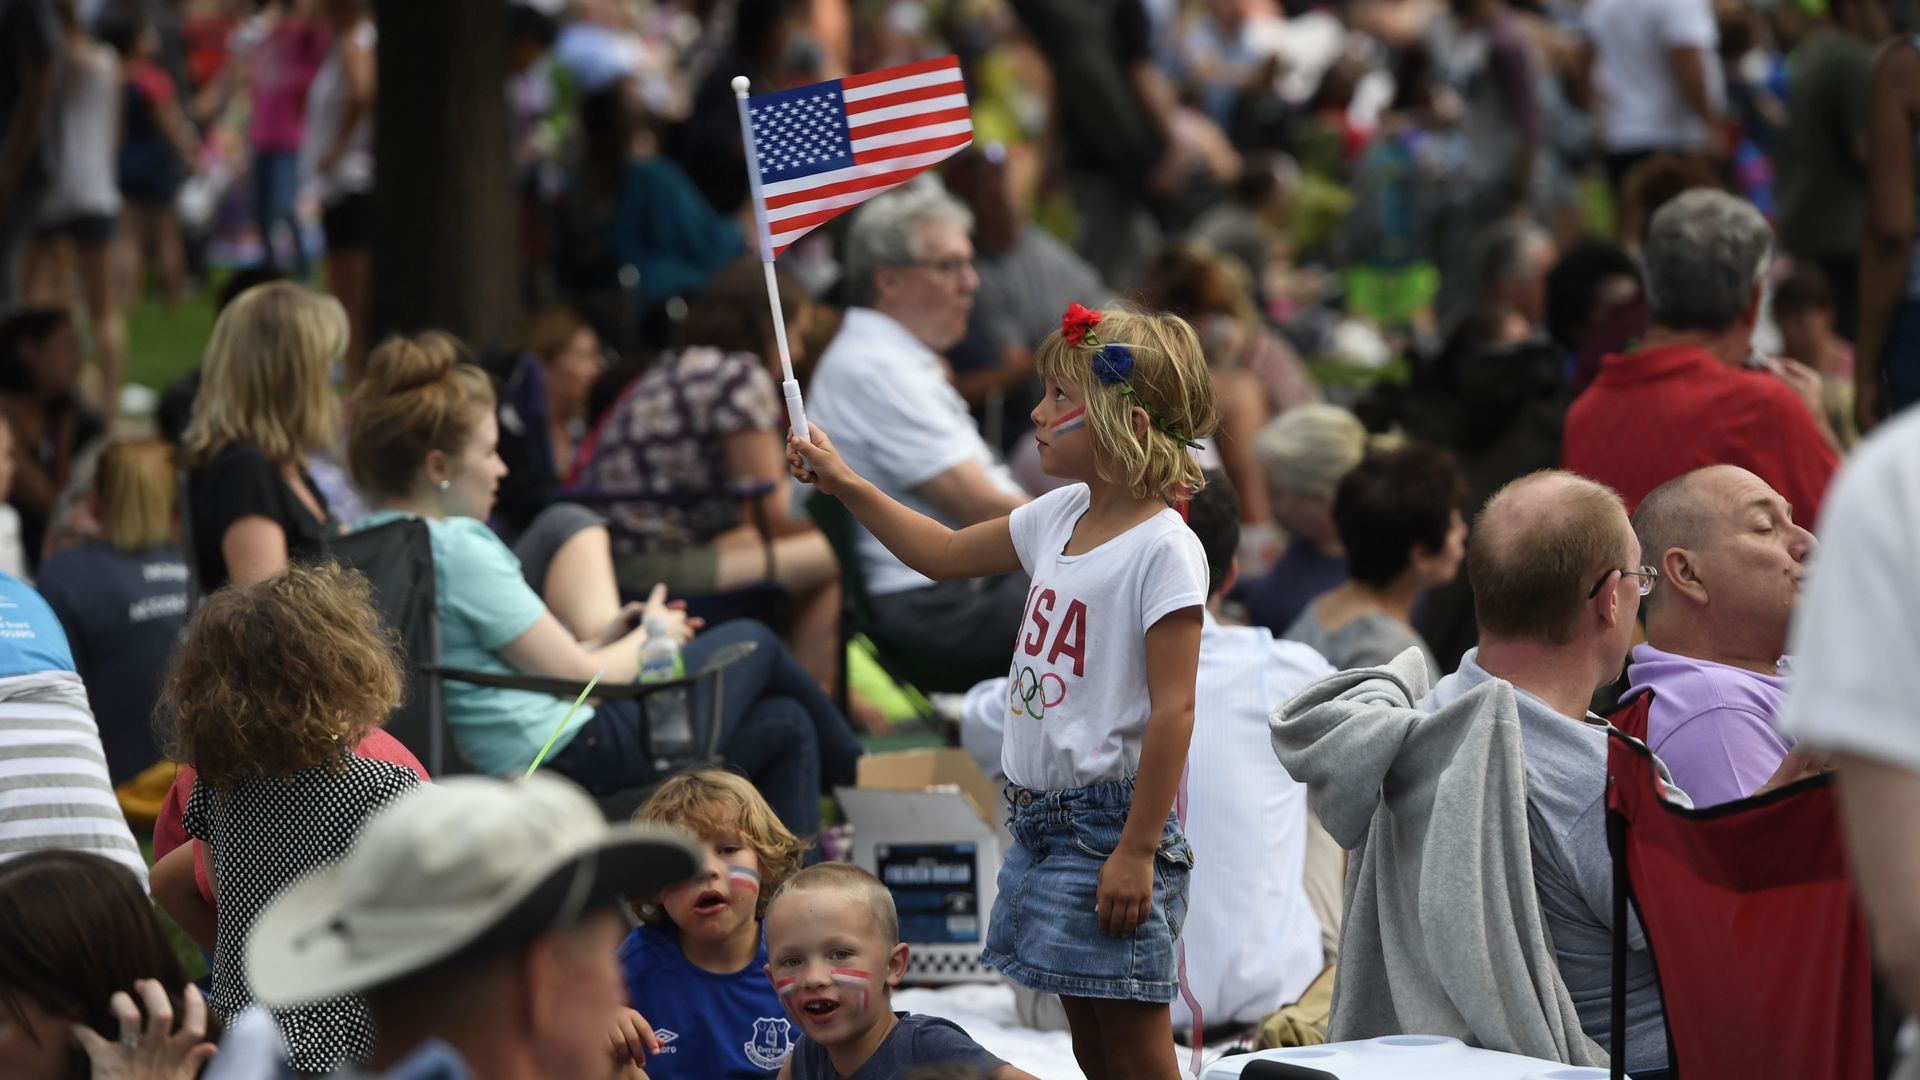 A child in a white shirt with USA on it raises an American flag